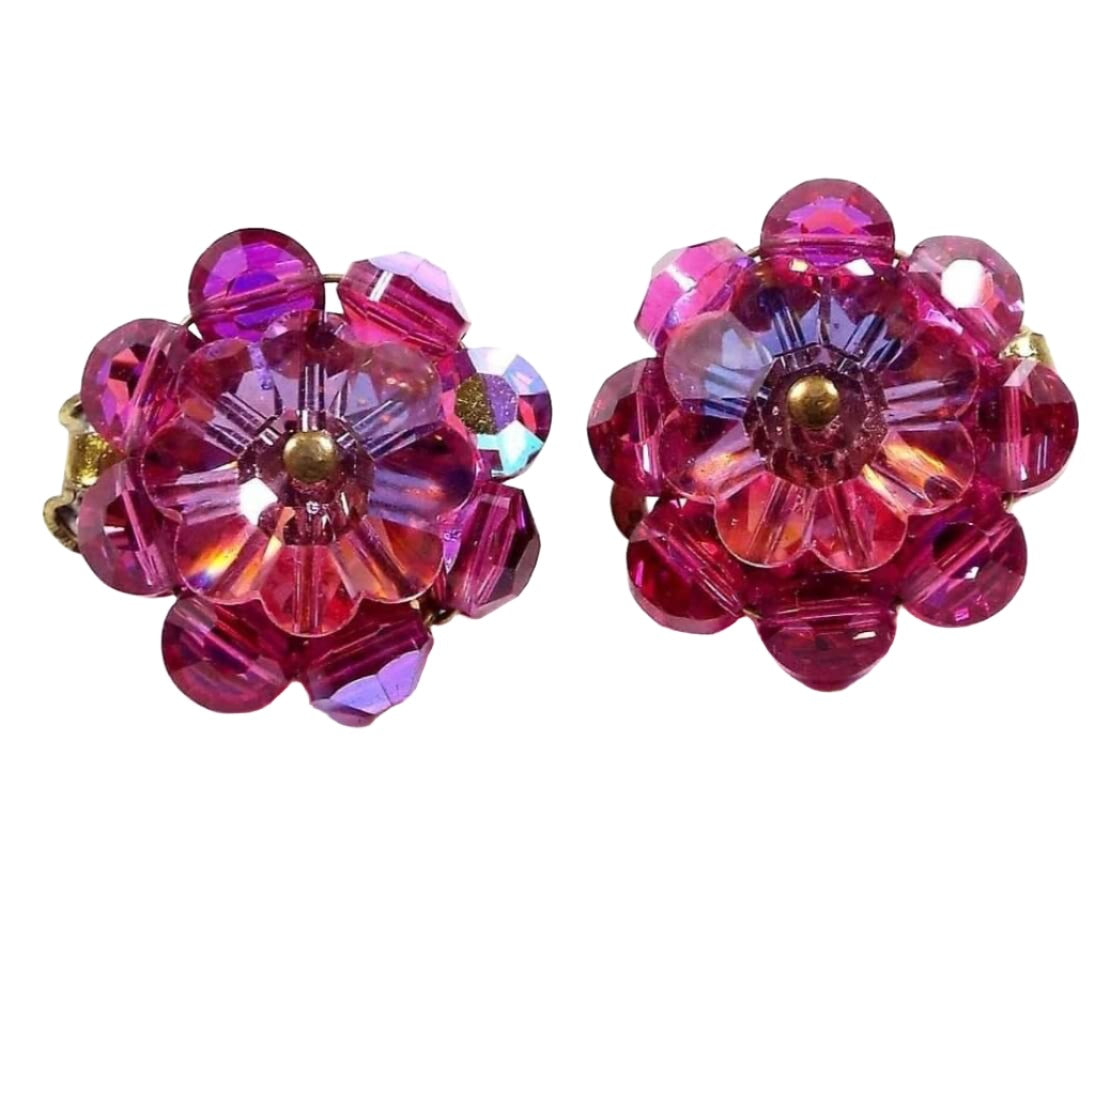 Front view of the Mid Century vintage beaded flower earrings. The glass crystal beads are bright pink and AB bright pink in color. There is a flower bead on the front and a row of faceted beads around the edge. 